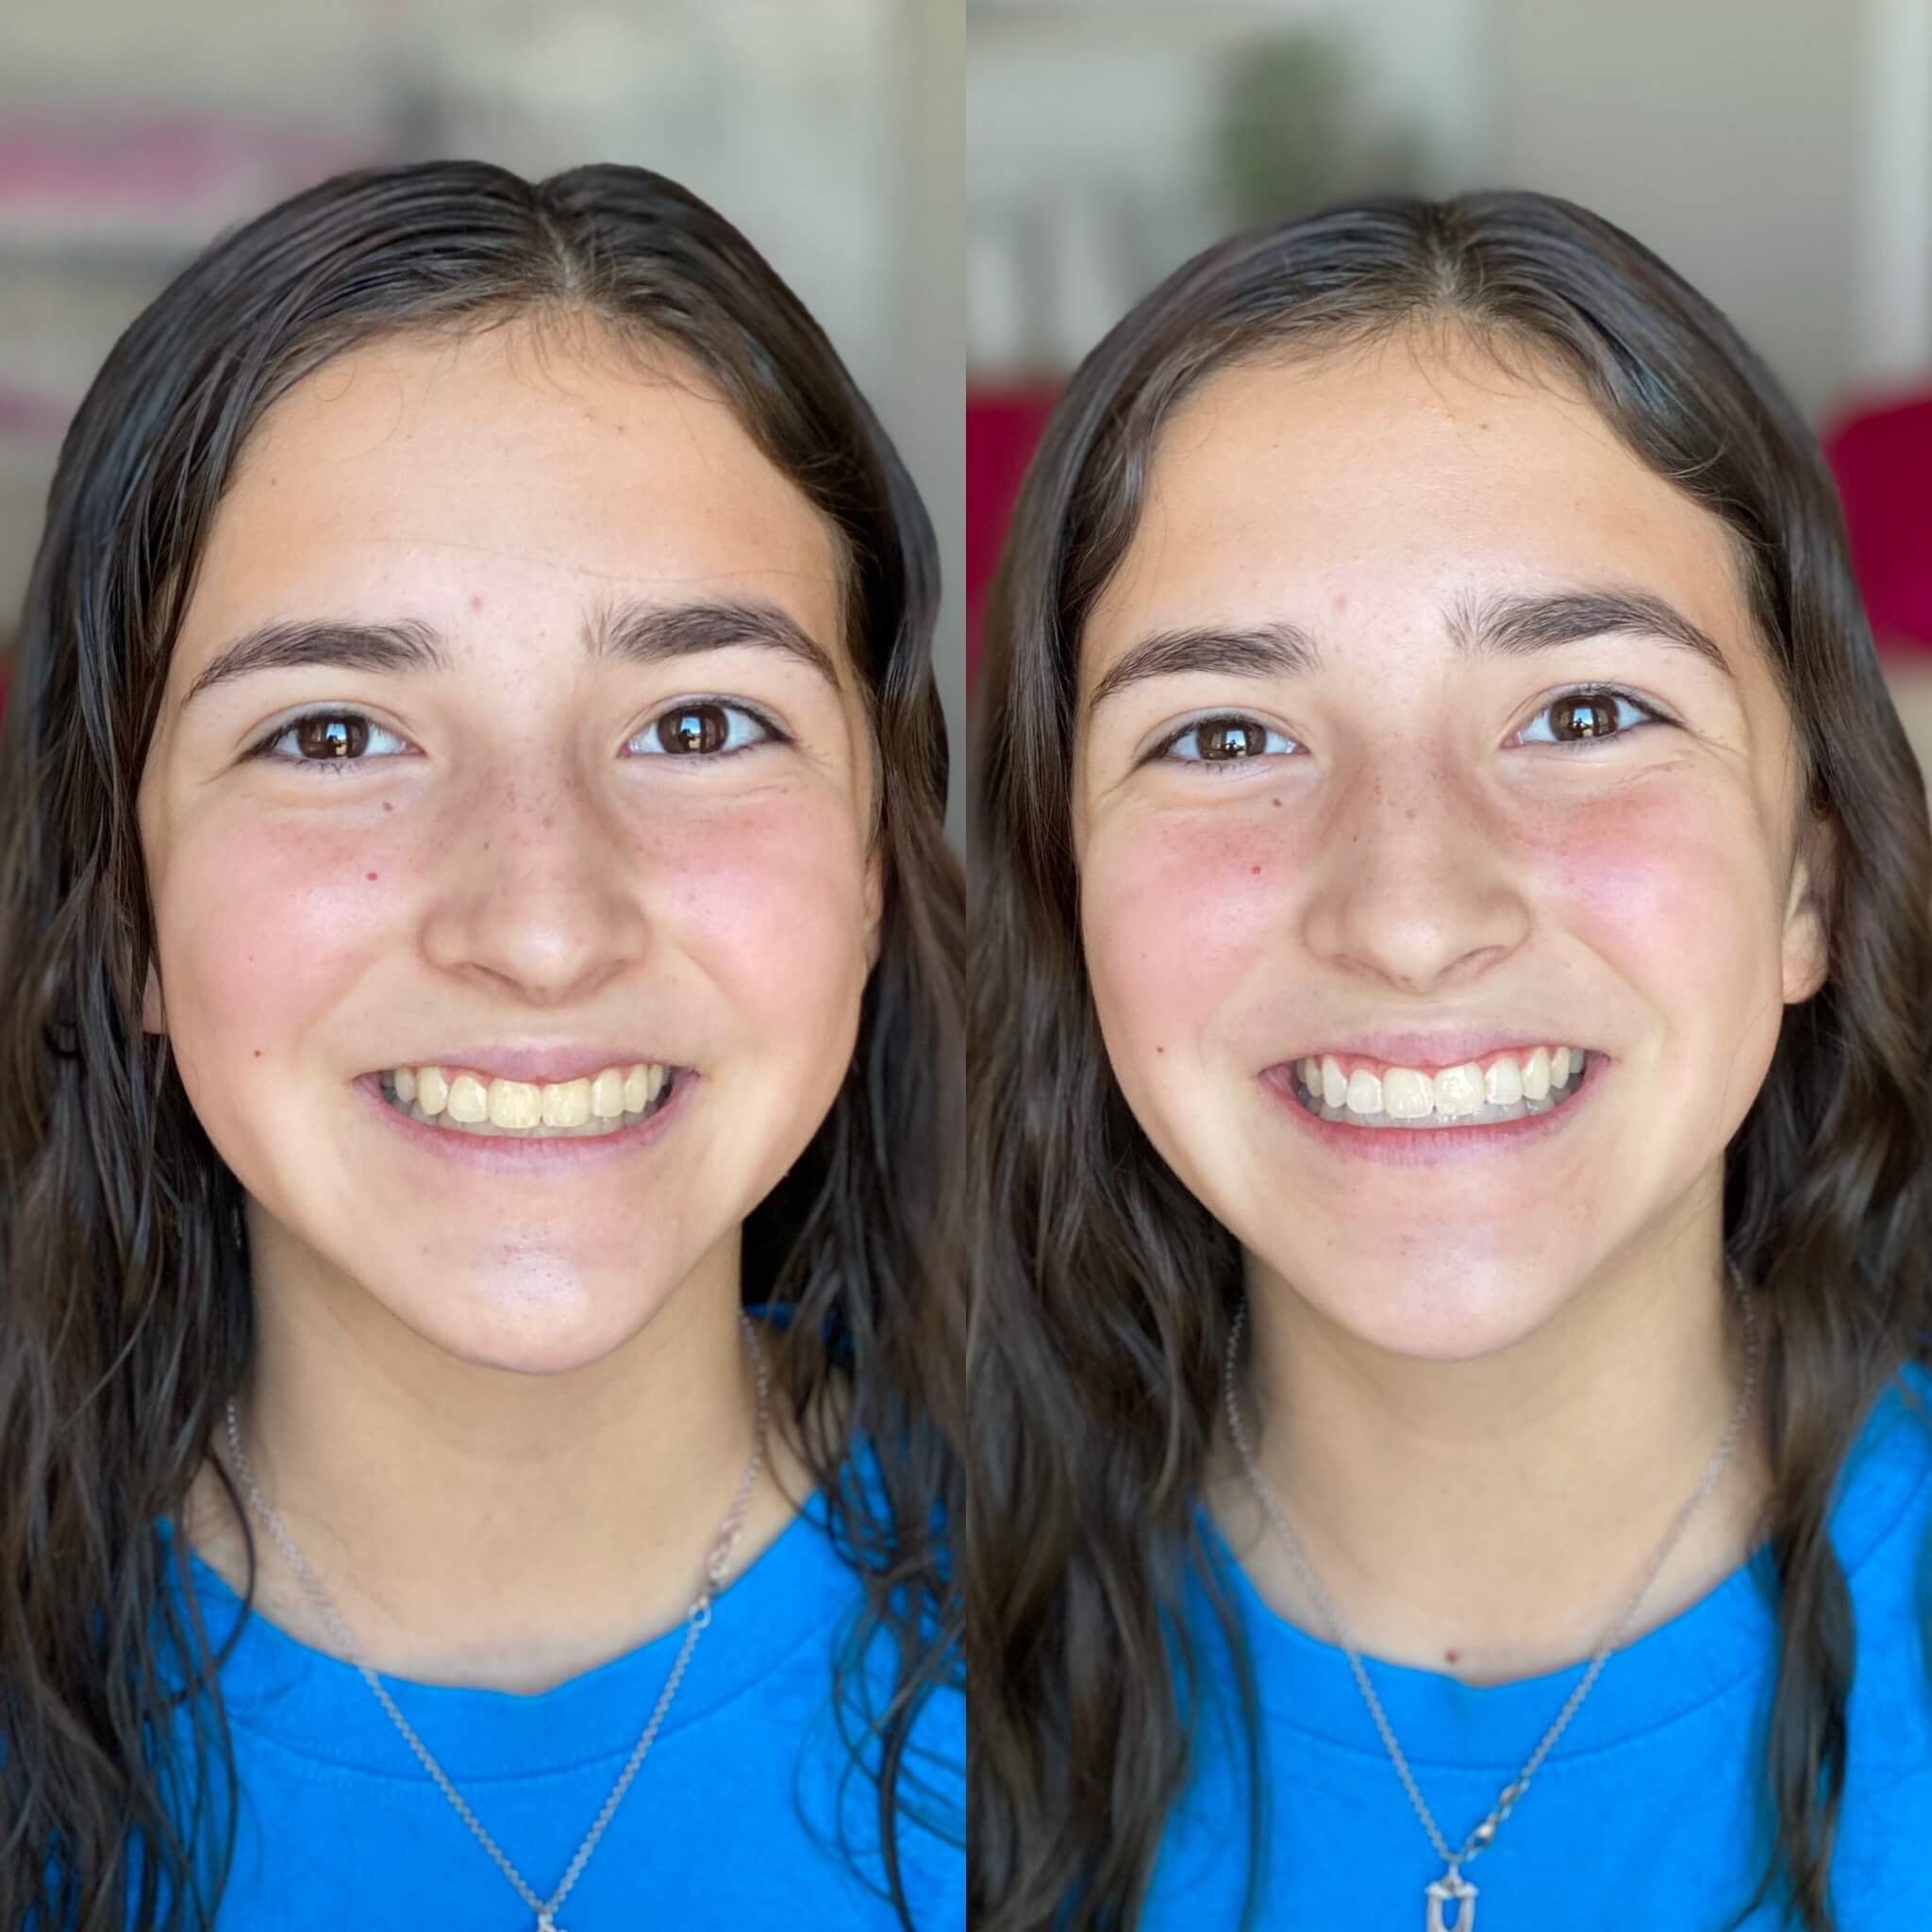 young girl austin teeth whitening before after laser davinci